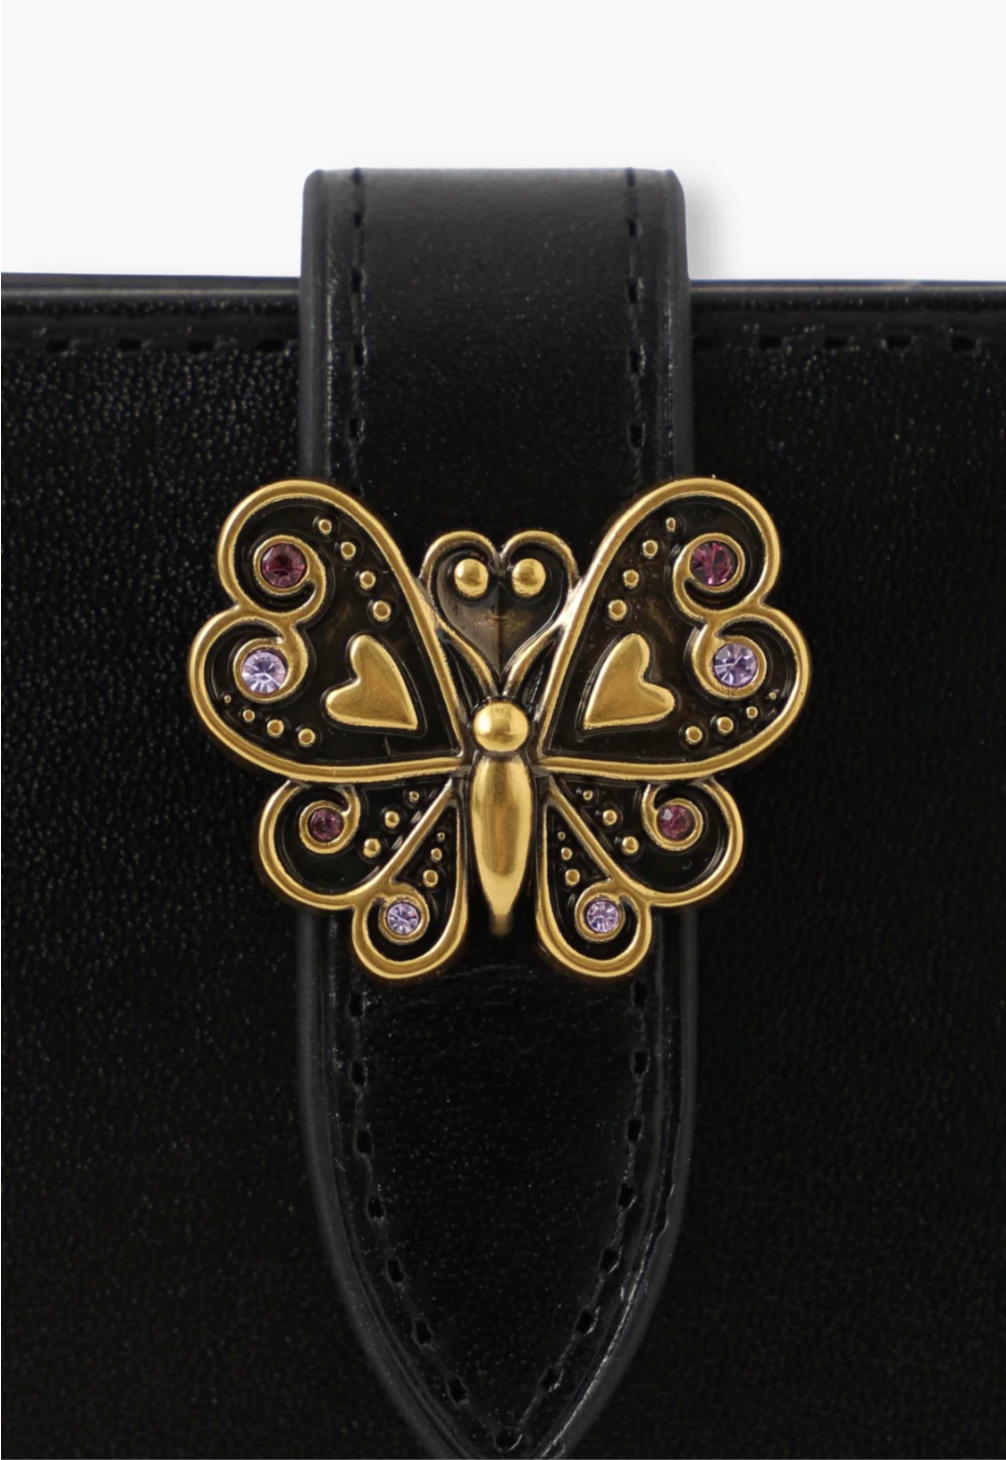 Small Roger Wallet black detail of Anna Sui golden butterfly hardware on flap, black stiches 